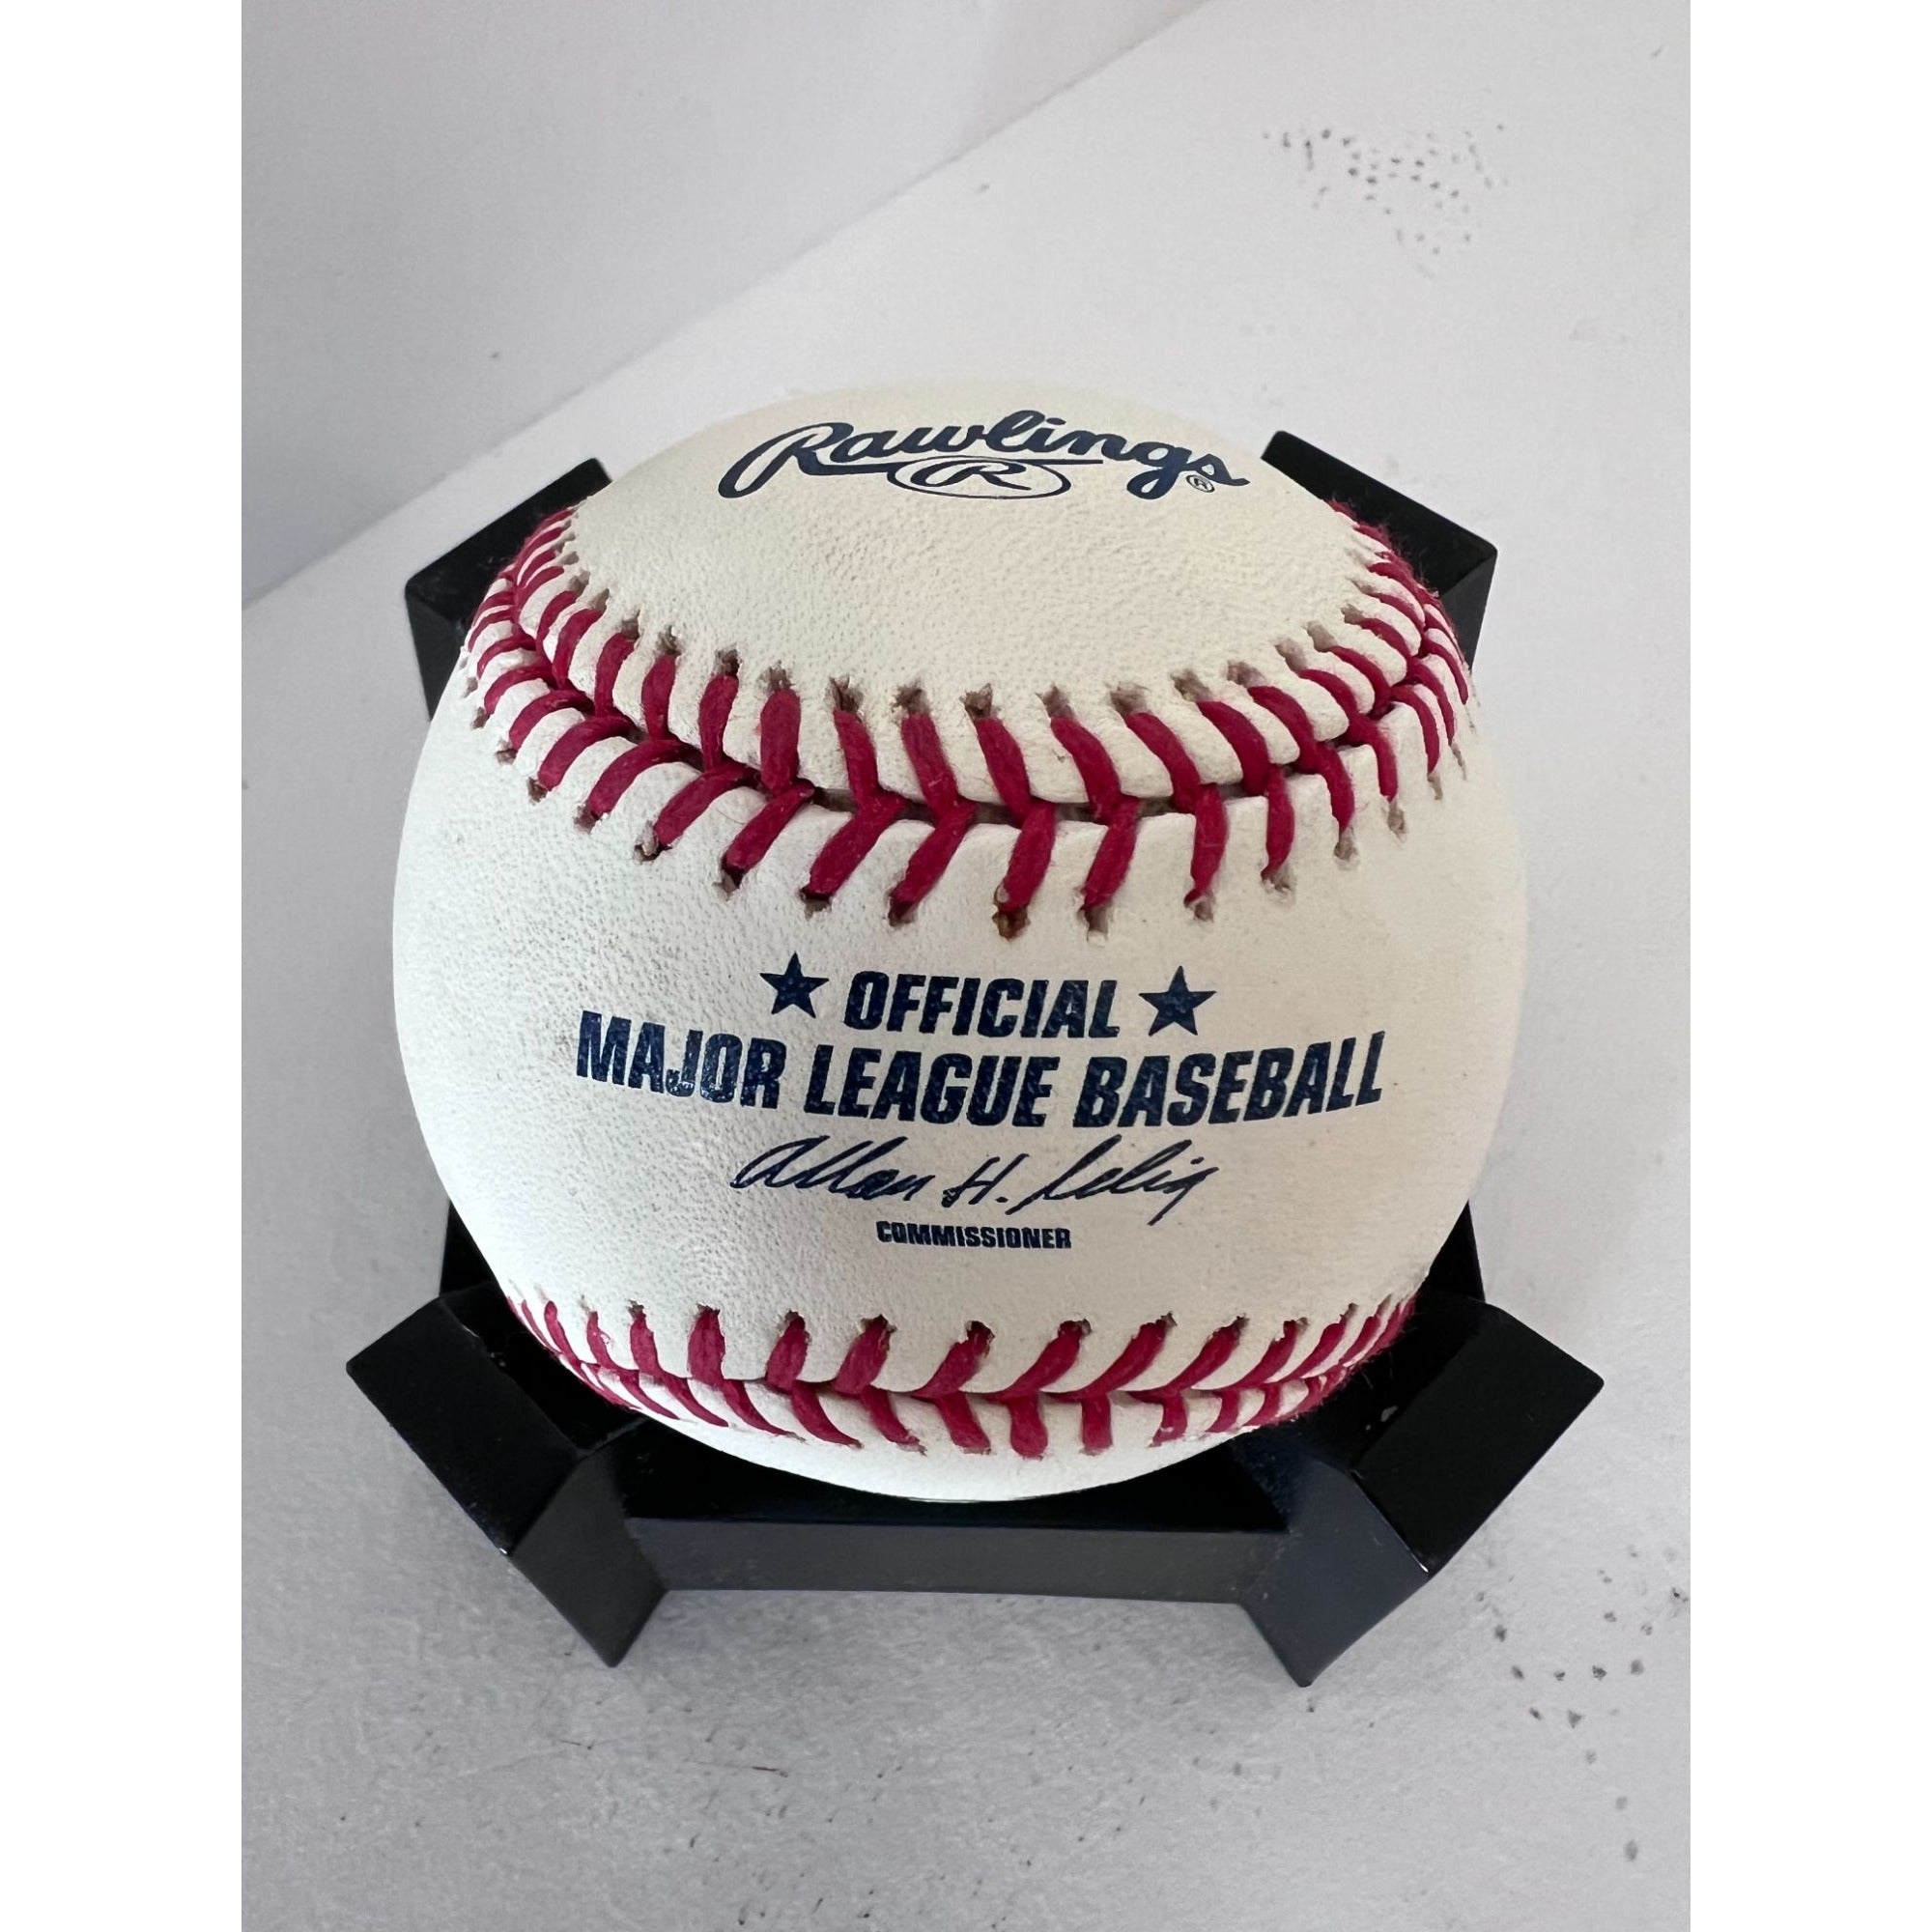 George W Bush former President of the United States of America Rawlings official MLB baseball signed with proof